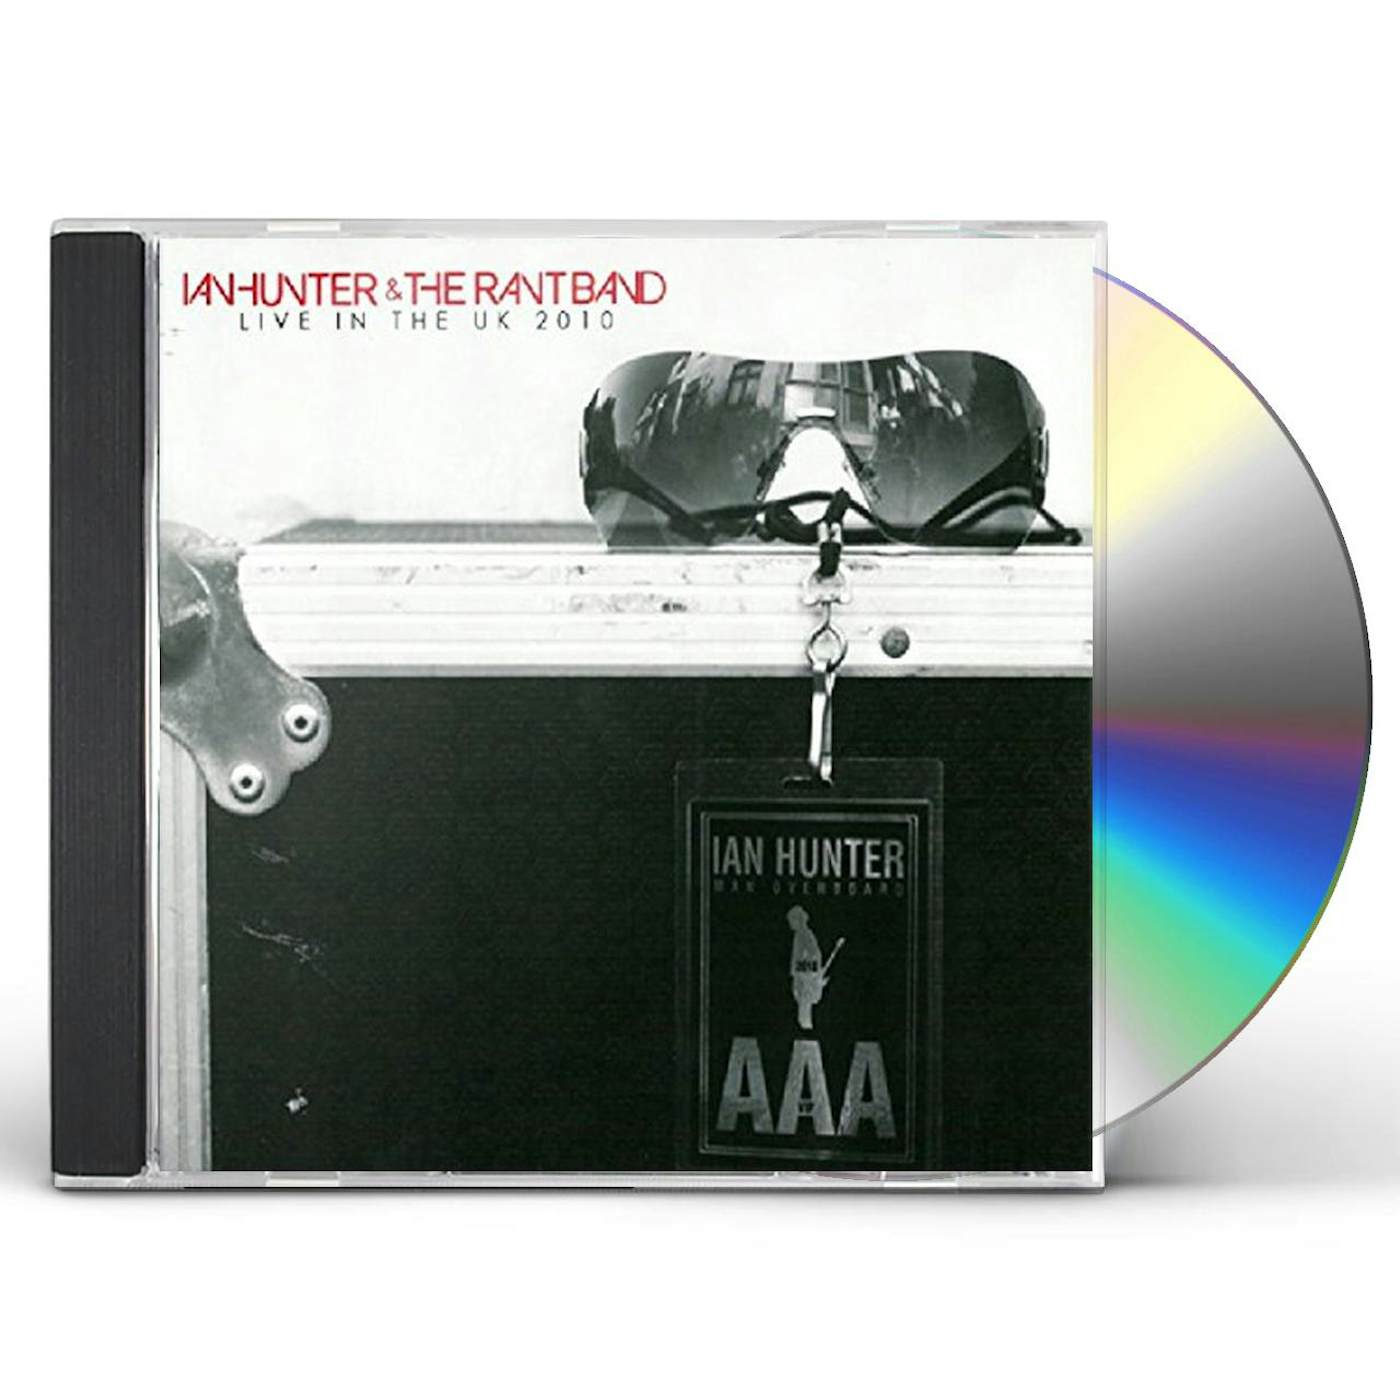 Ian Hunter And The Rant Band LIVE IN THE UK 2010 CD